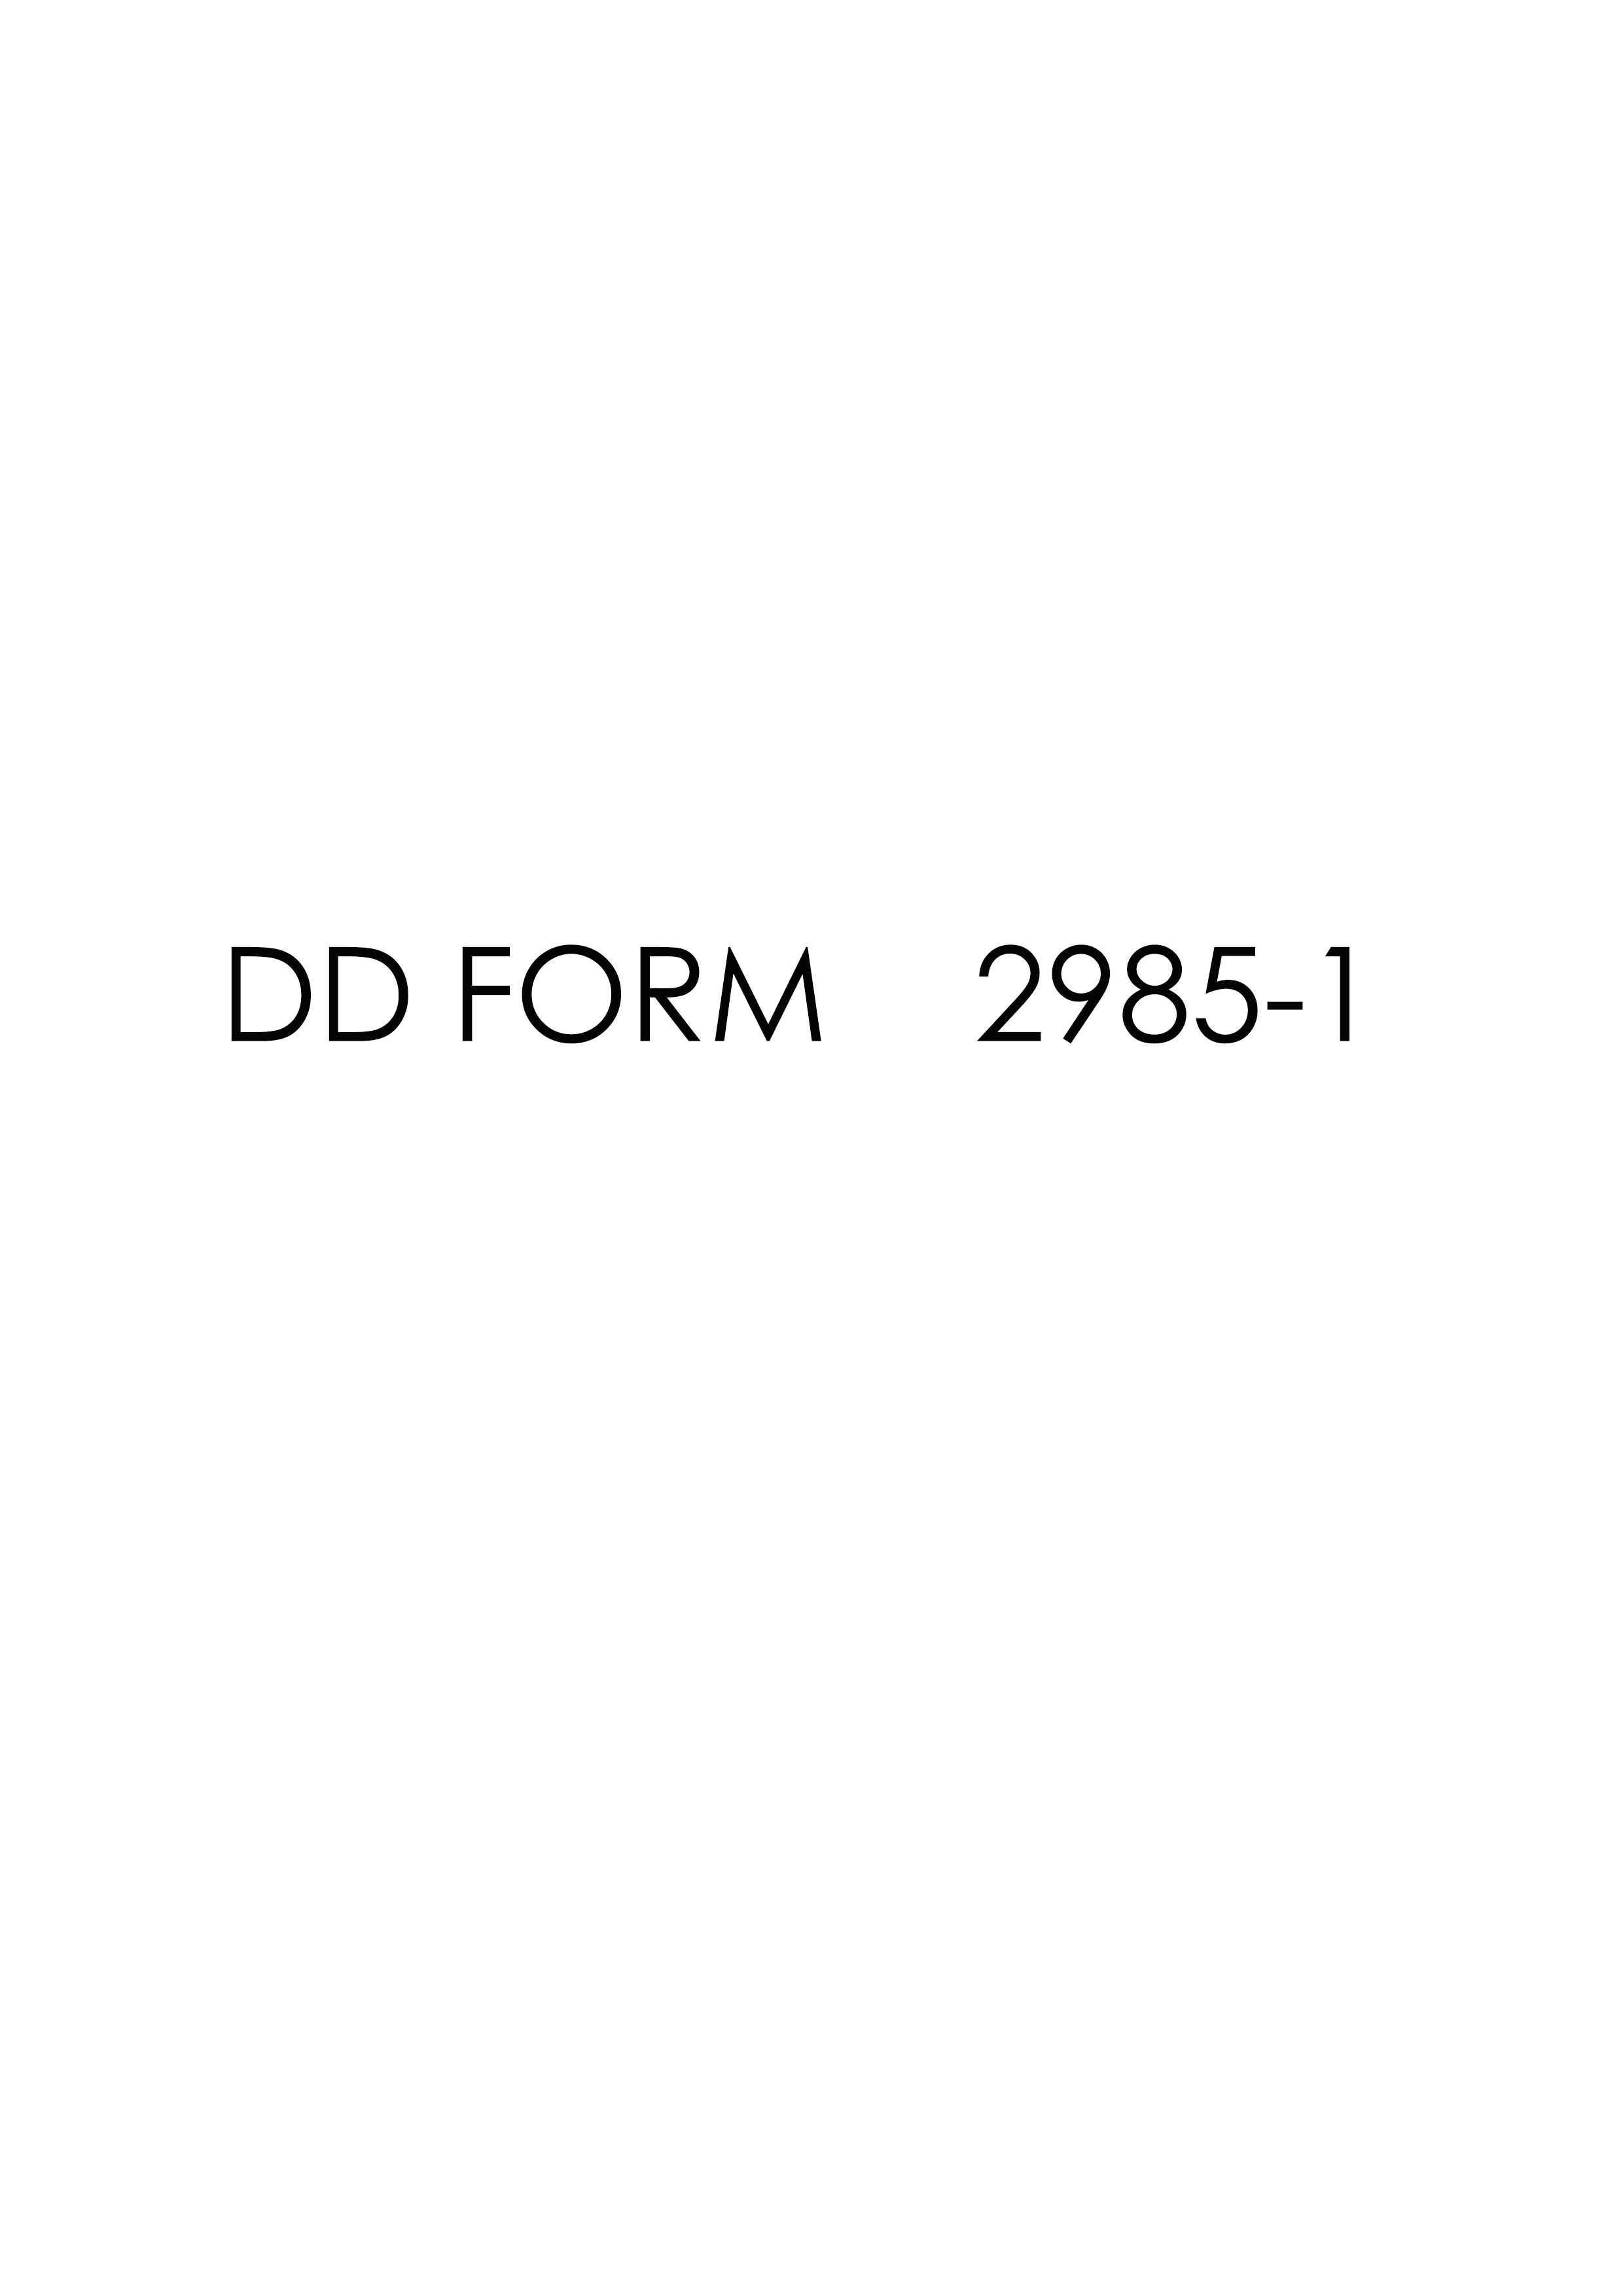 Download Fillable dd Form 2985-1